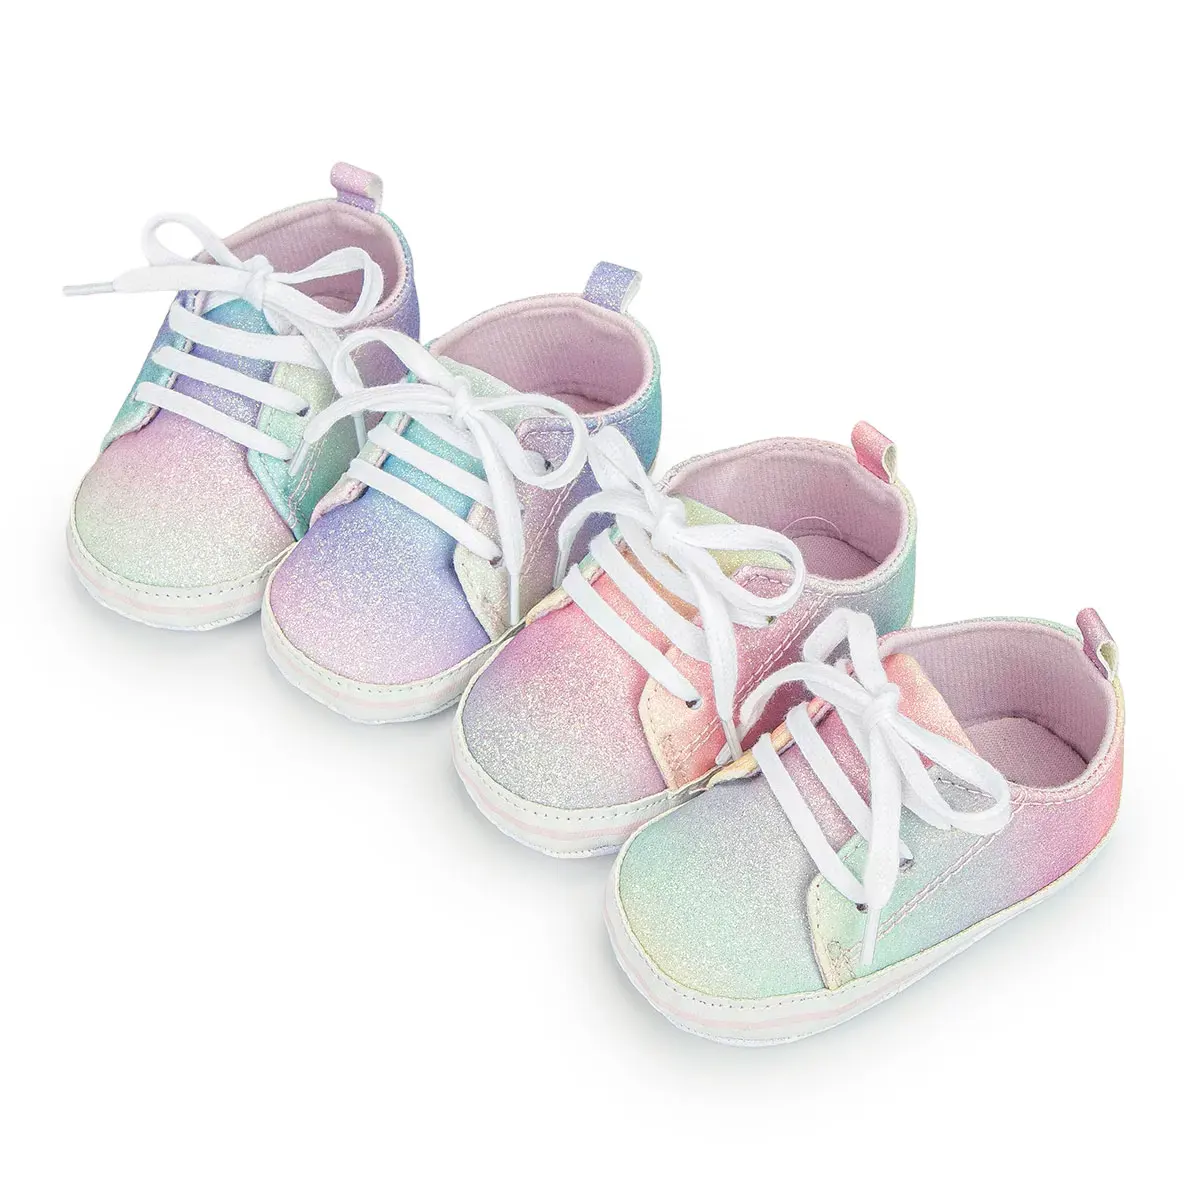 

MOQ 1 New style fashion indoor infant baby baby sneakers sport Cotton soft bottom Anti-slip sole Baby shoes, 2 colors